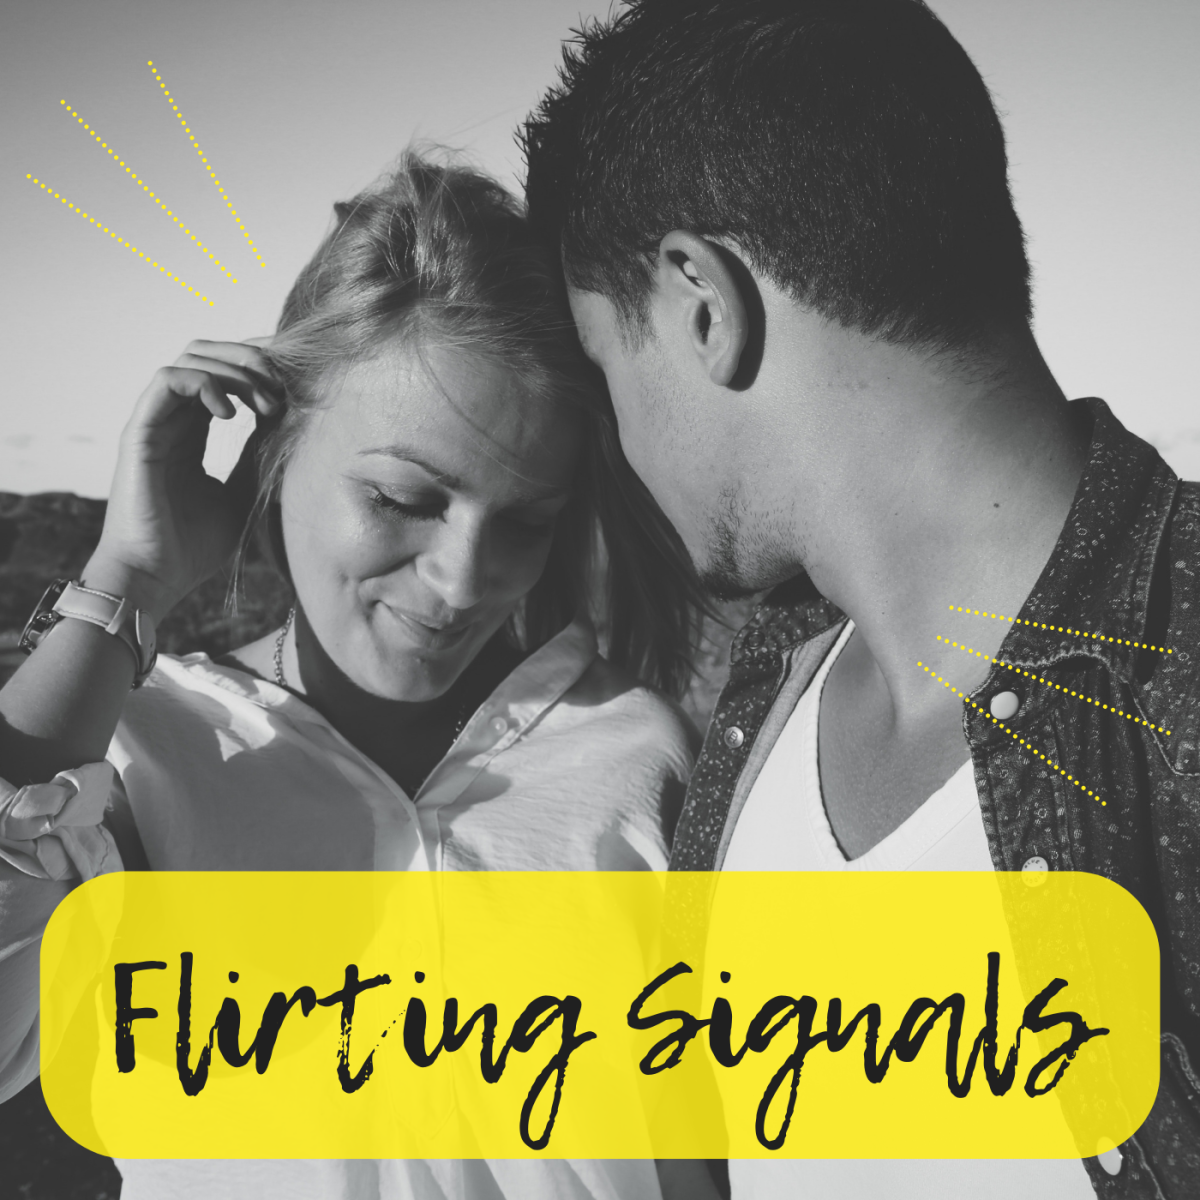 Men and women flirt by sending both conscious and subconscious signals to each other.